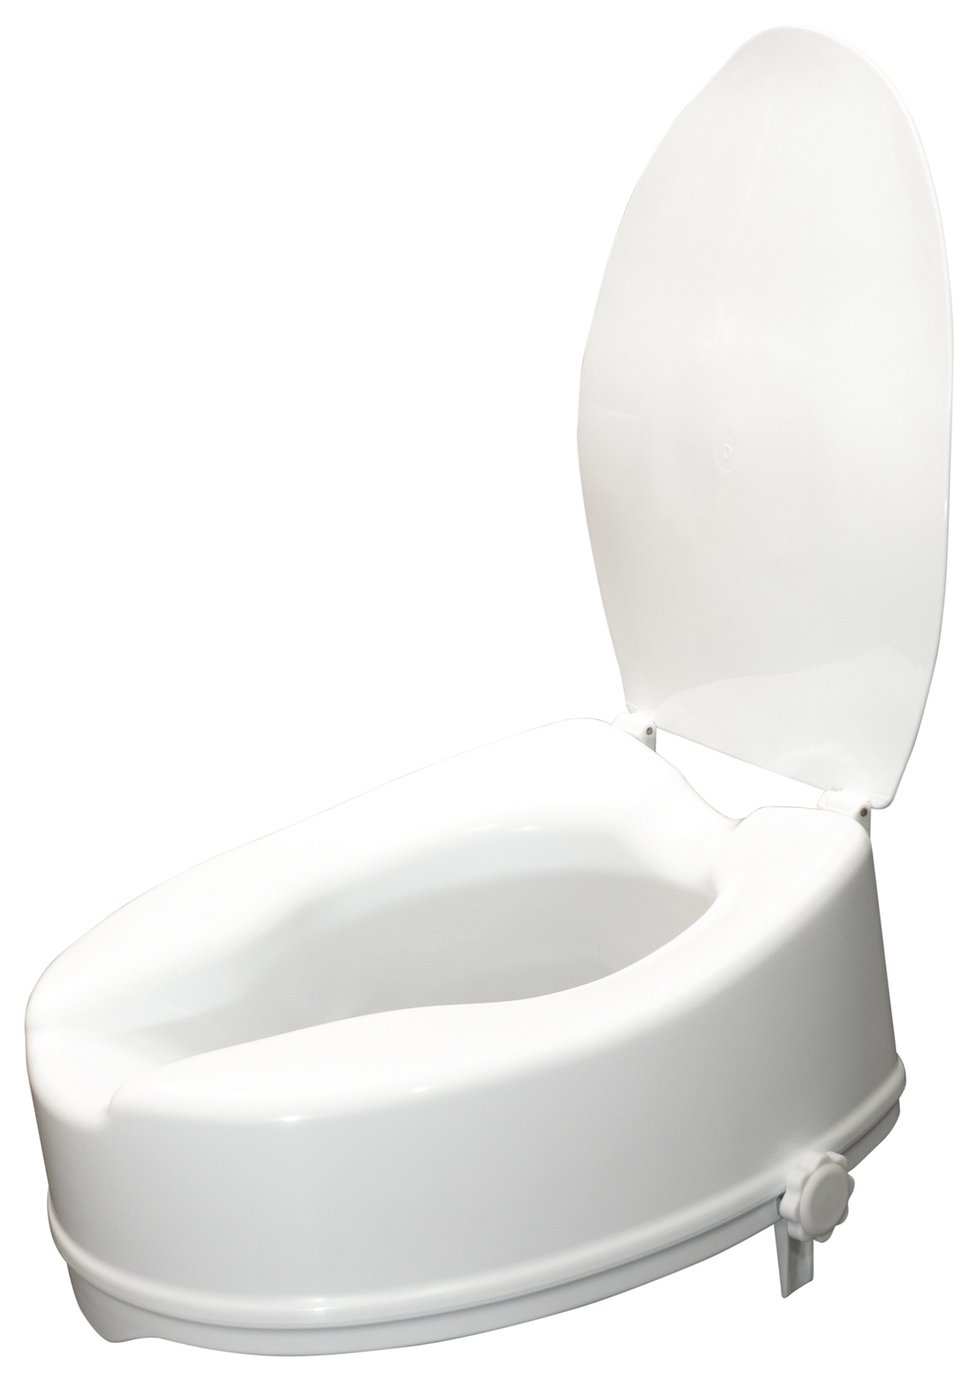 disabled toilet seat